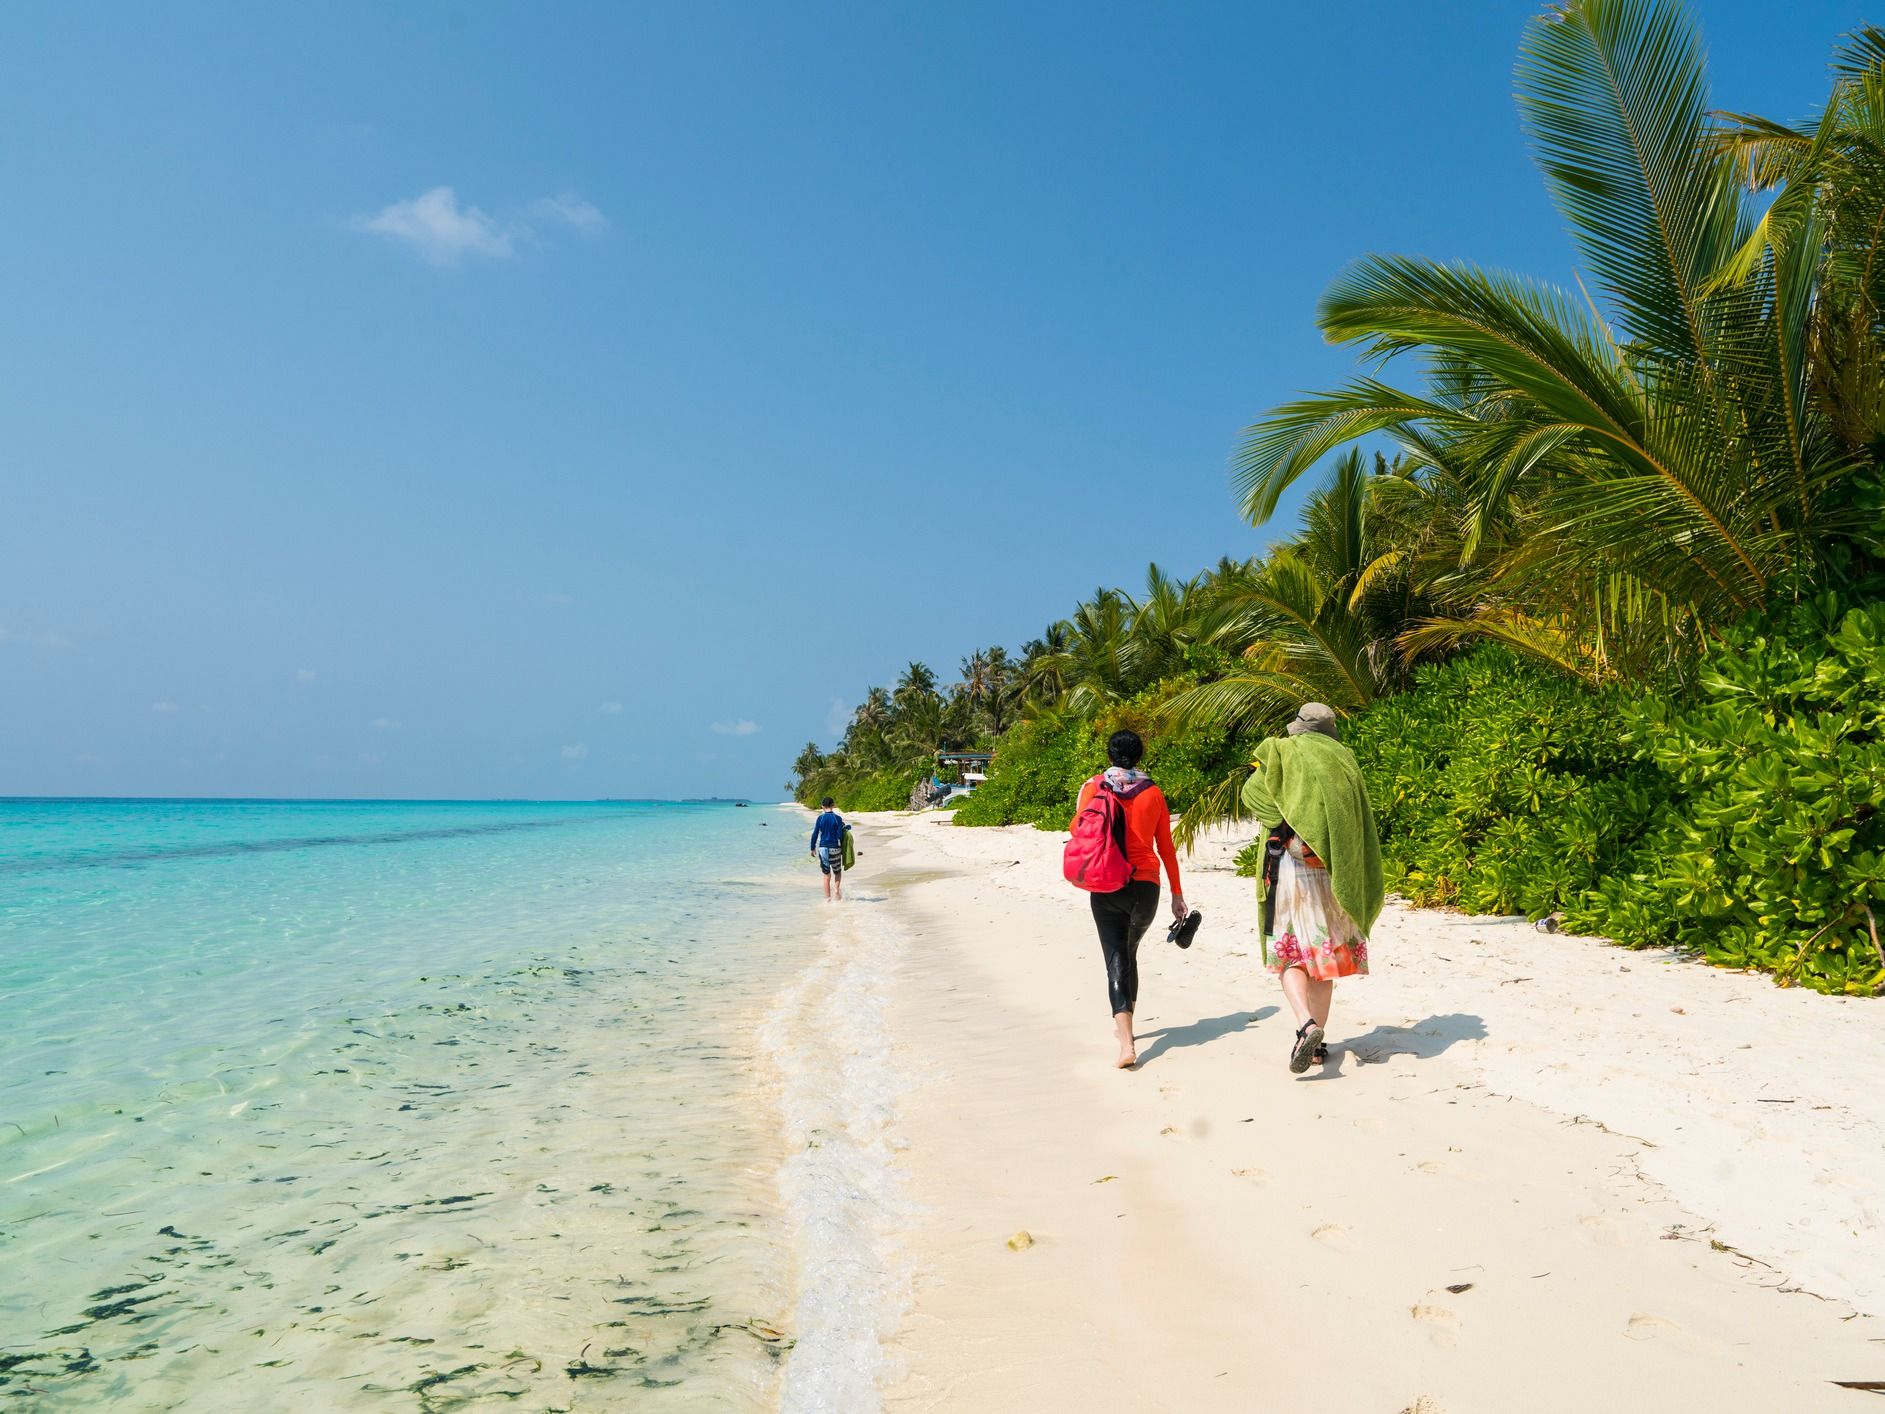 A group walking on a beach in the Maldives, where the beach is sandwiched between water and lush greenery.